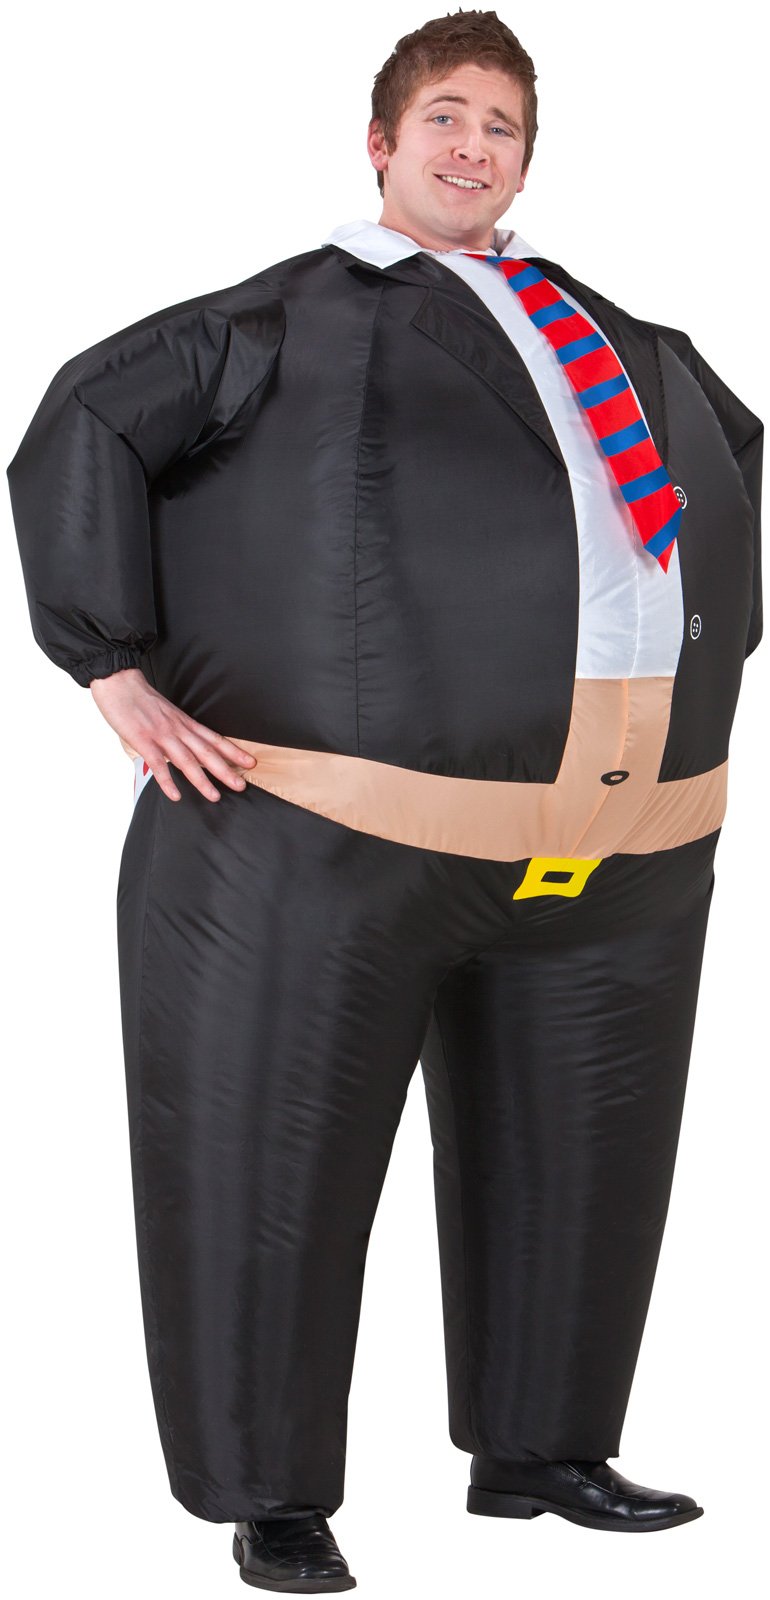 Big Boss Inflatable Belly Buster Adult Costume